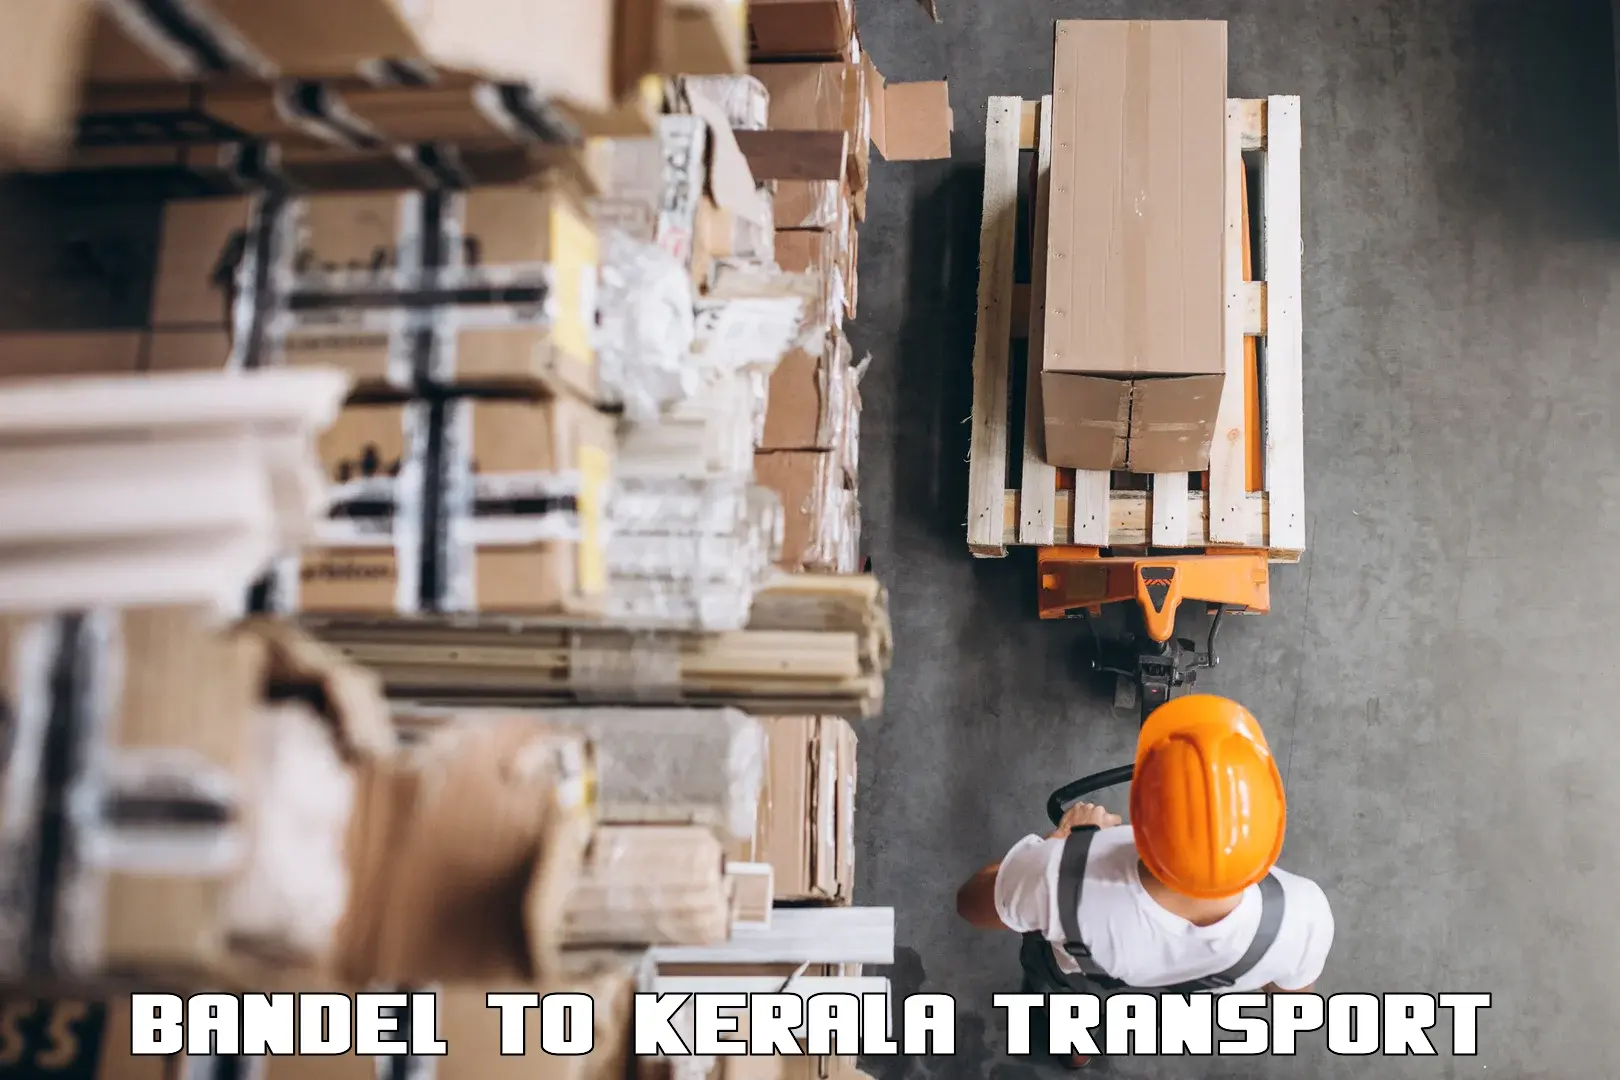 Goods delivery service Bandel to Kerala